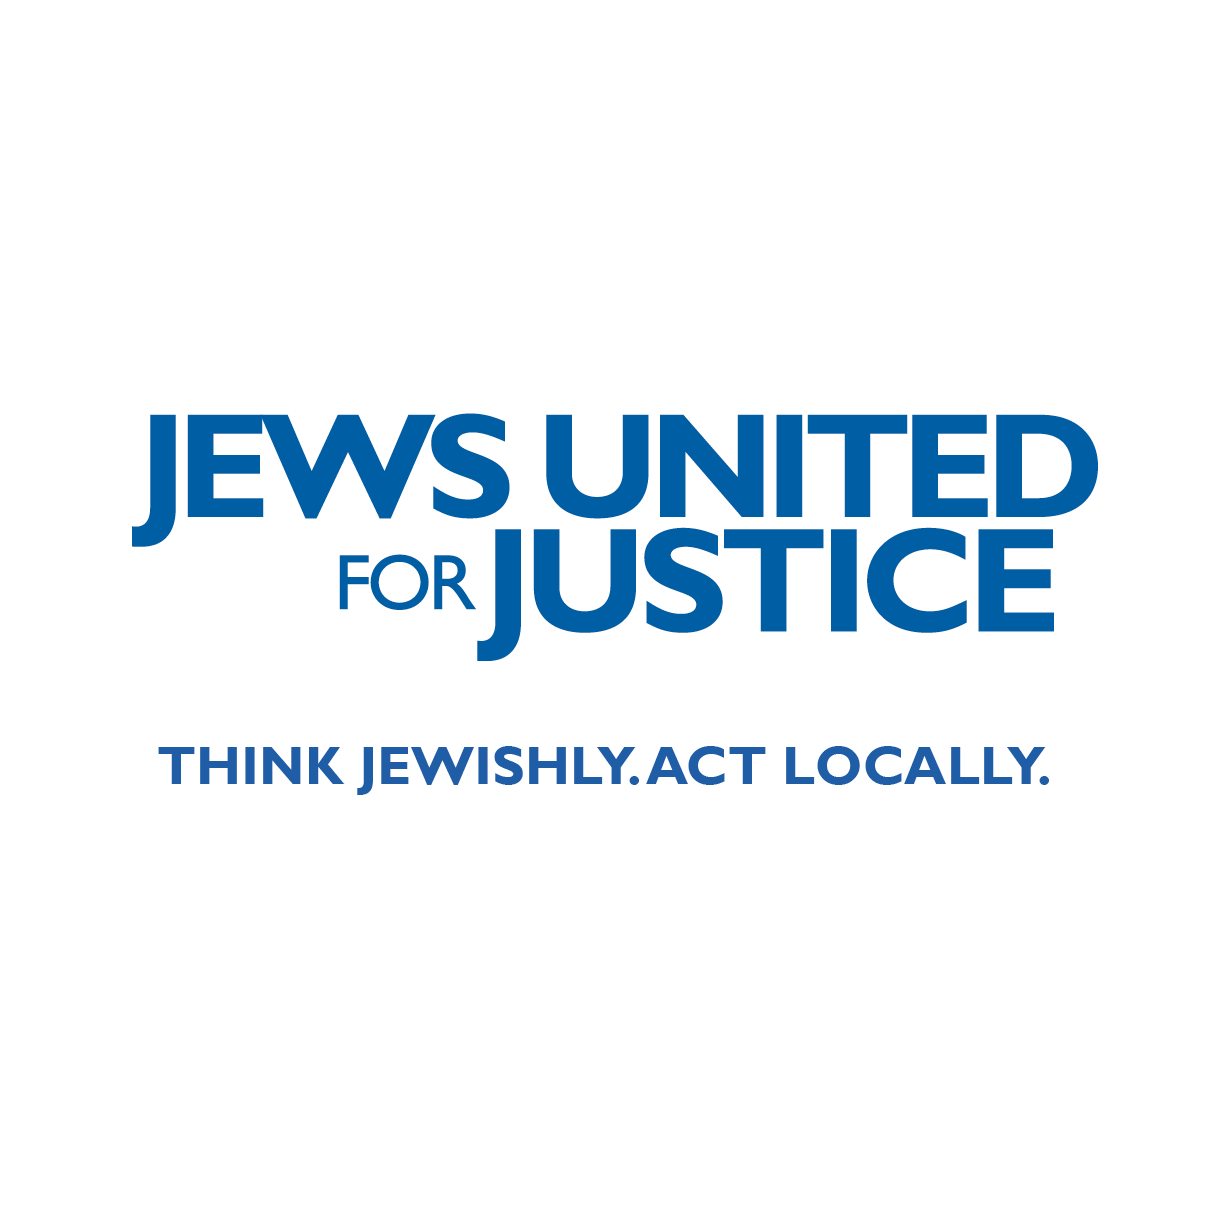 Jews United for Justice